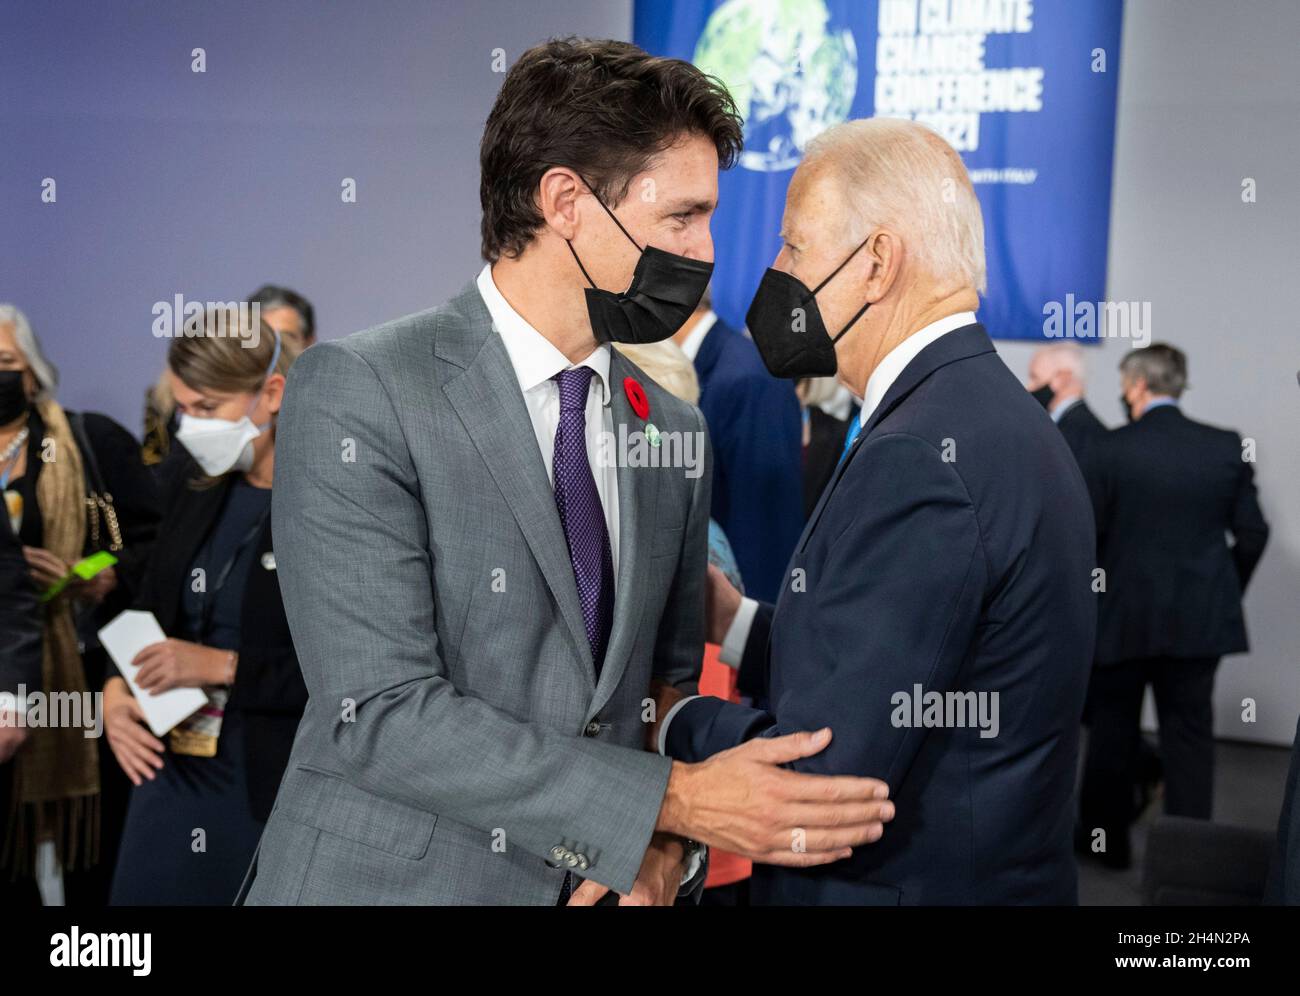 Glasgow, United Kingdom. 02nd Nov, 2021. U.S President Joe Biden chats with Canadian Prime Minister Justin Trudeau, left, during the second day of the COP26 U.N. Climate Summit at the Glasgow Science Centre November 2, 2021 in Glasgow, Scotland. Credit: Adam Schultz/White House Photo/Alamy Live News Stock Photo